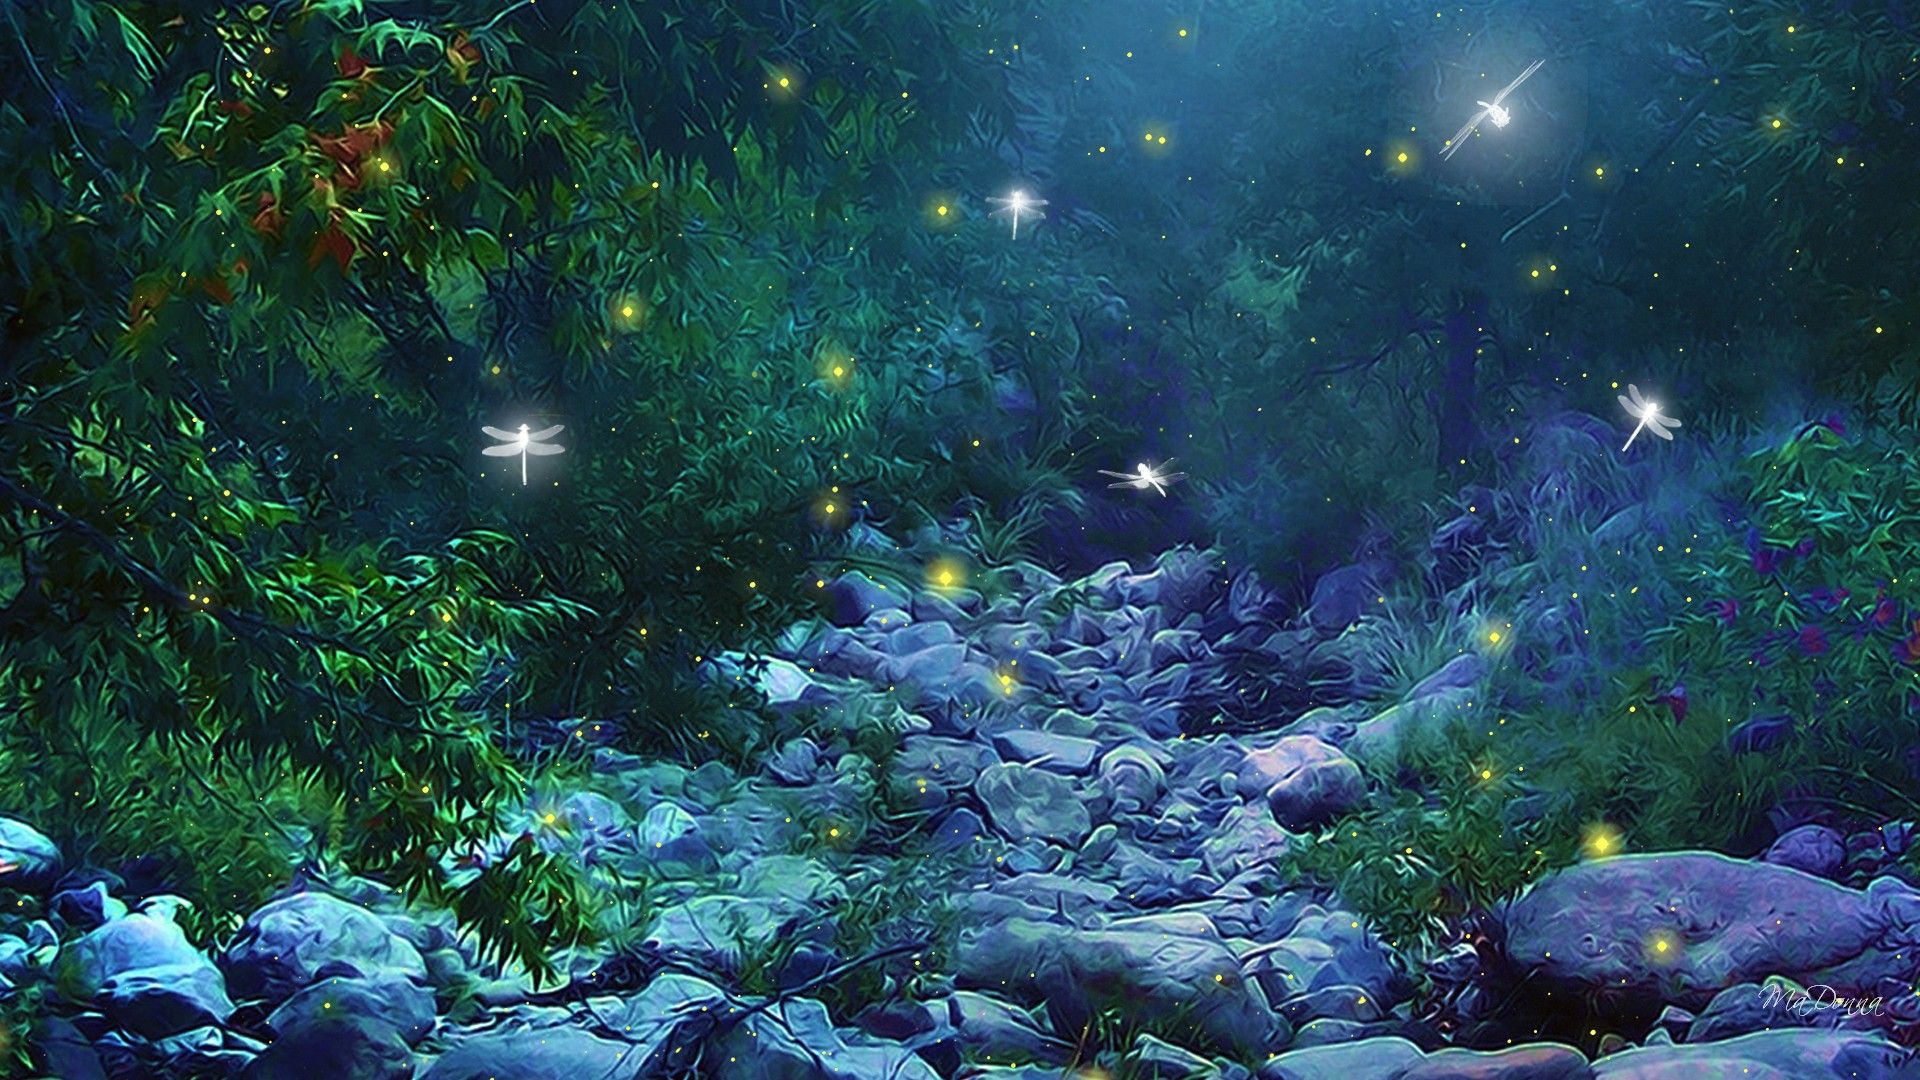 Free download magic insects firefly night glow lights wallpaper 1920x1080 35440 [1920x1080] for your Desktop, Mobile & Tablet. Explore Magical Wallpaper for Desktop. Summer Wallpaper For Desktop, Awesome Wallpaper